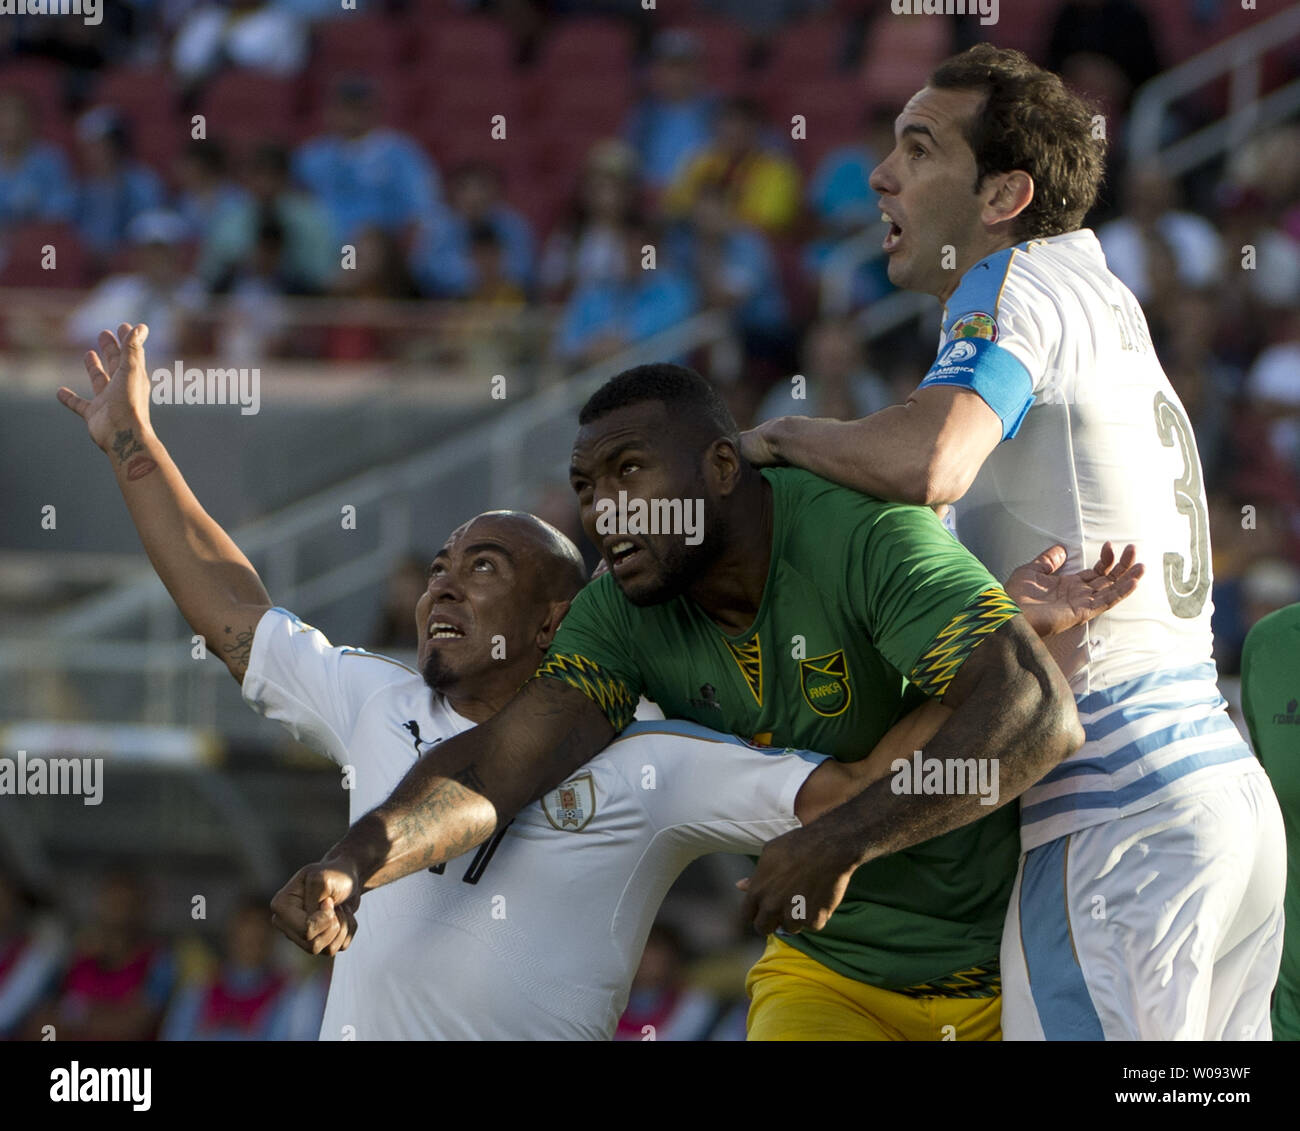 Jamaica's Westley Morgan (C) gets squeezed between Uruguay's Raul Arevlo  Rios (L) and Diego Godin on a corner kick in the first half at COPA America  Centenario at Levi's Stadium in Santa